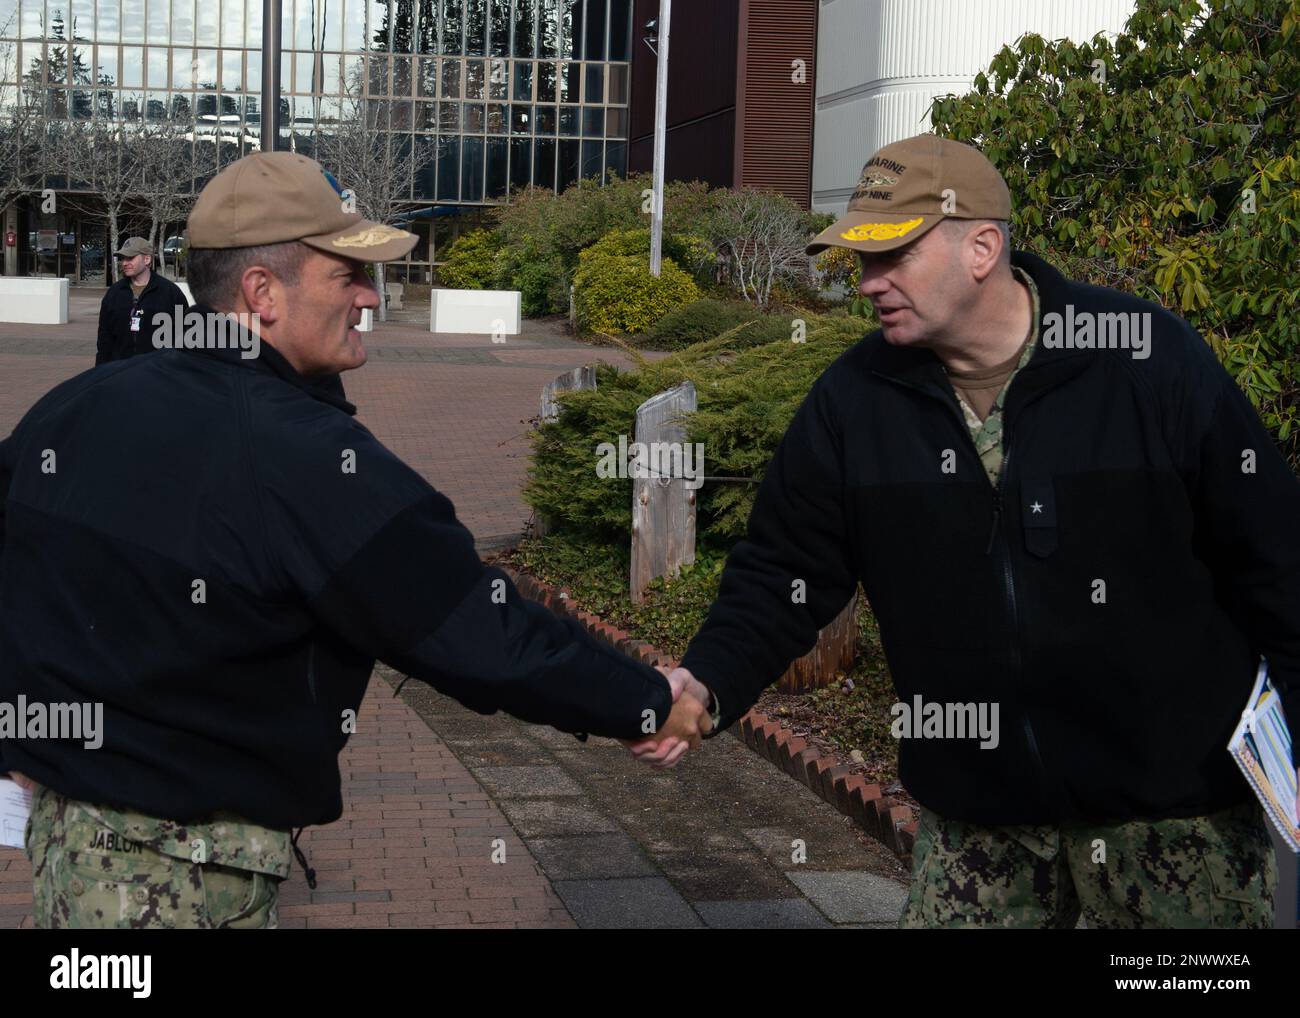 230215-N-ED185-1006  NAVAL BASE KITSAP – BANGOR, Wash. (Feb. 15, 2023) Rear Admiral Mark Behning, commander, Submarine Group 9, right, greets Rear Adm. Jeff Jablon, commander, Submarine Force, U.S. Pacific Fleet, during Jablon’s visit to Naval Base Kitsap - Bangor, Feb. 15, 2023. The Pacific Submarine Force provides strategic deterrence, anti-submarine warfare; anti-surface warfare; precision land strike; intelligence, surveillance, reconnaissance and early warning; and special warfare capabilities around the globe. Stock Photo